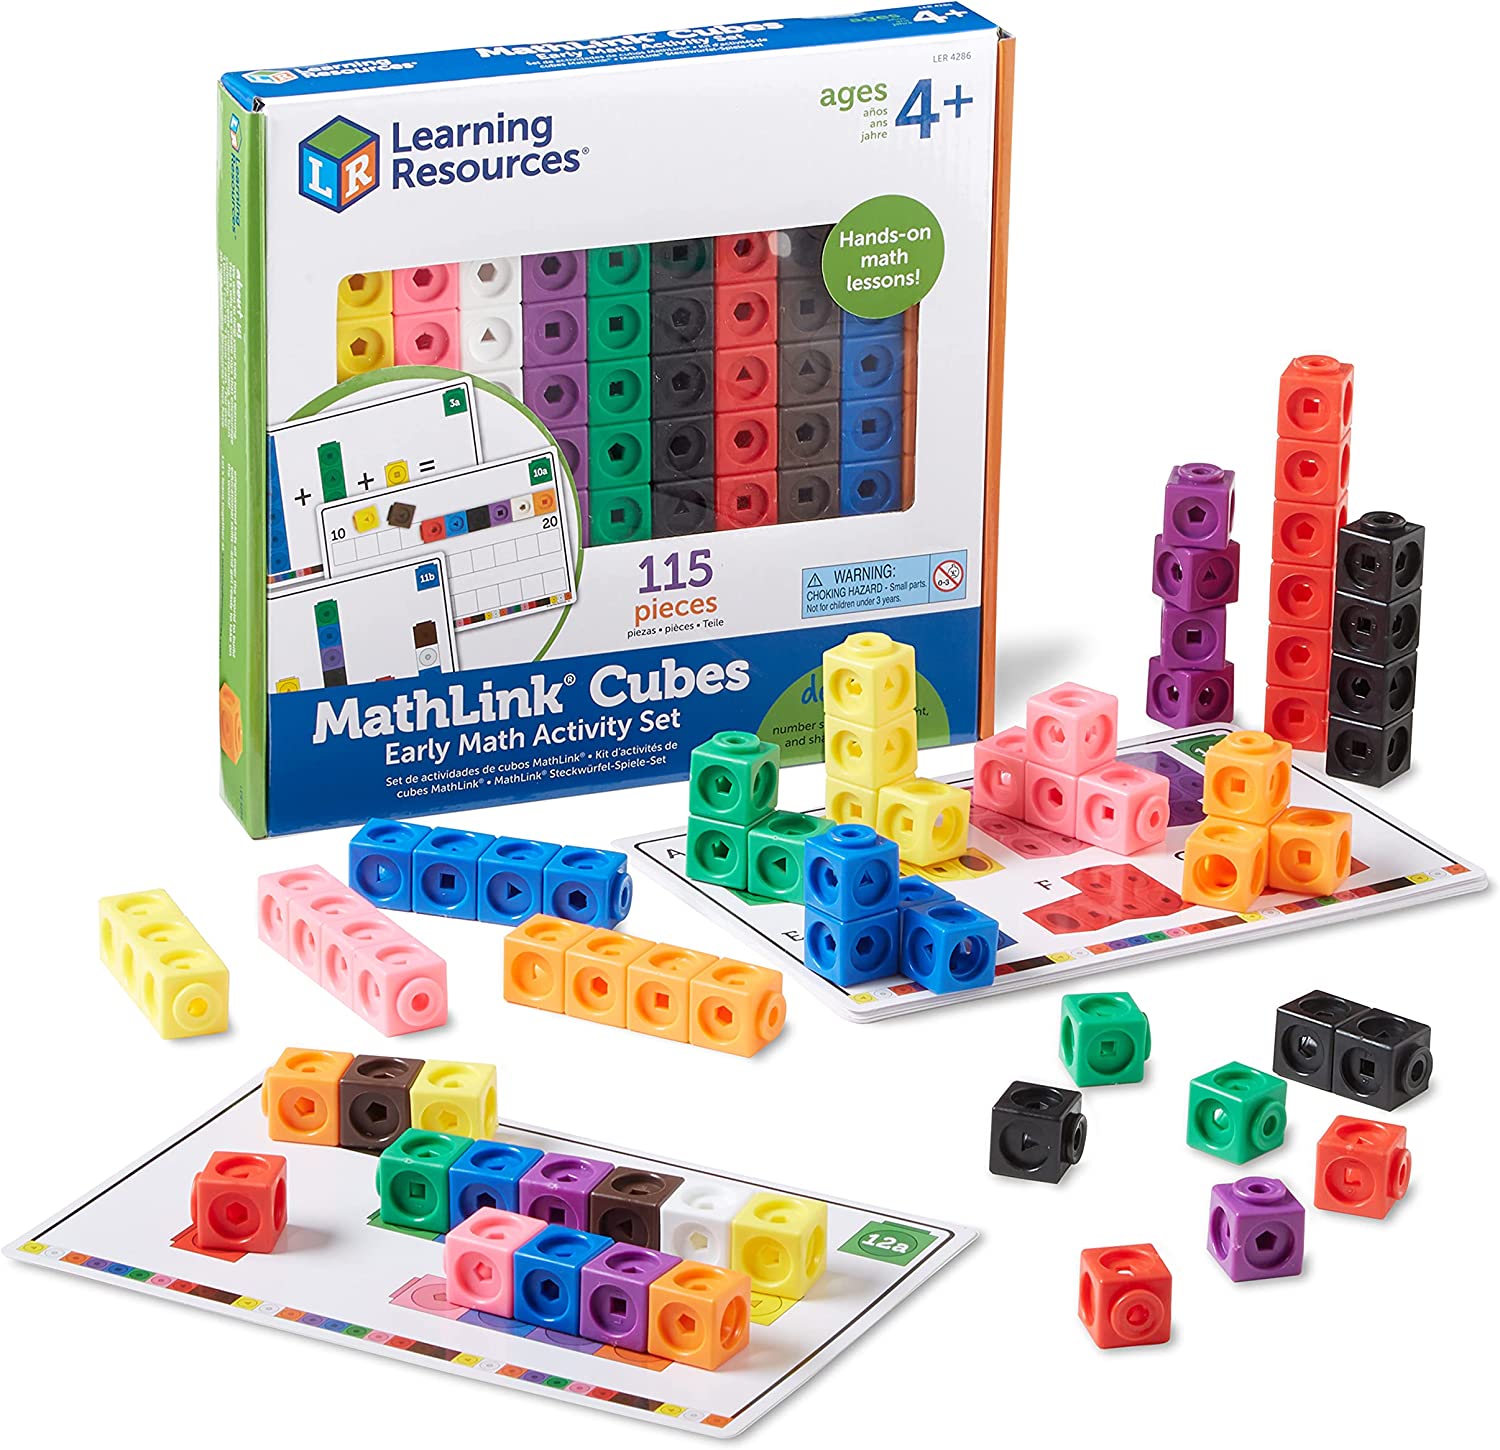 115-Piece Learning Resources MathLink Cubes Early Math Activity Set $7.49 at Amazon